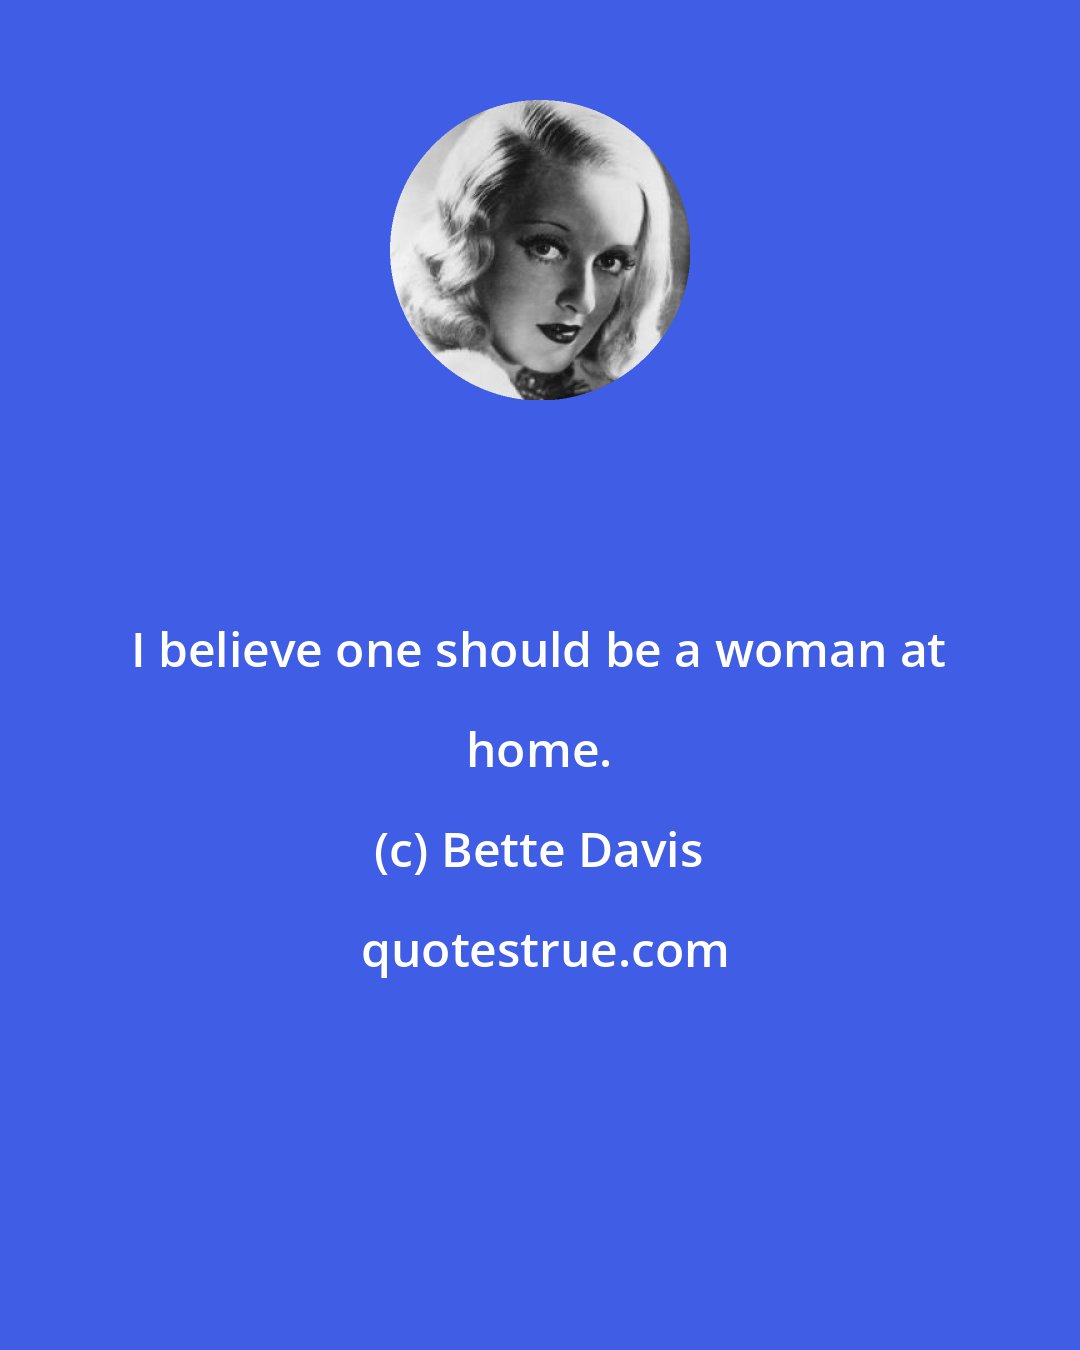 Bette Davis: I believe one should be a woman at home.